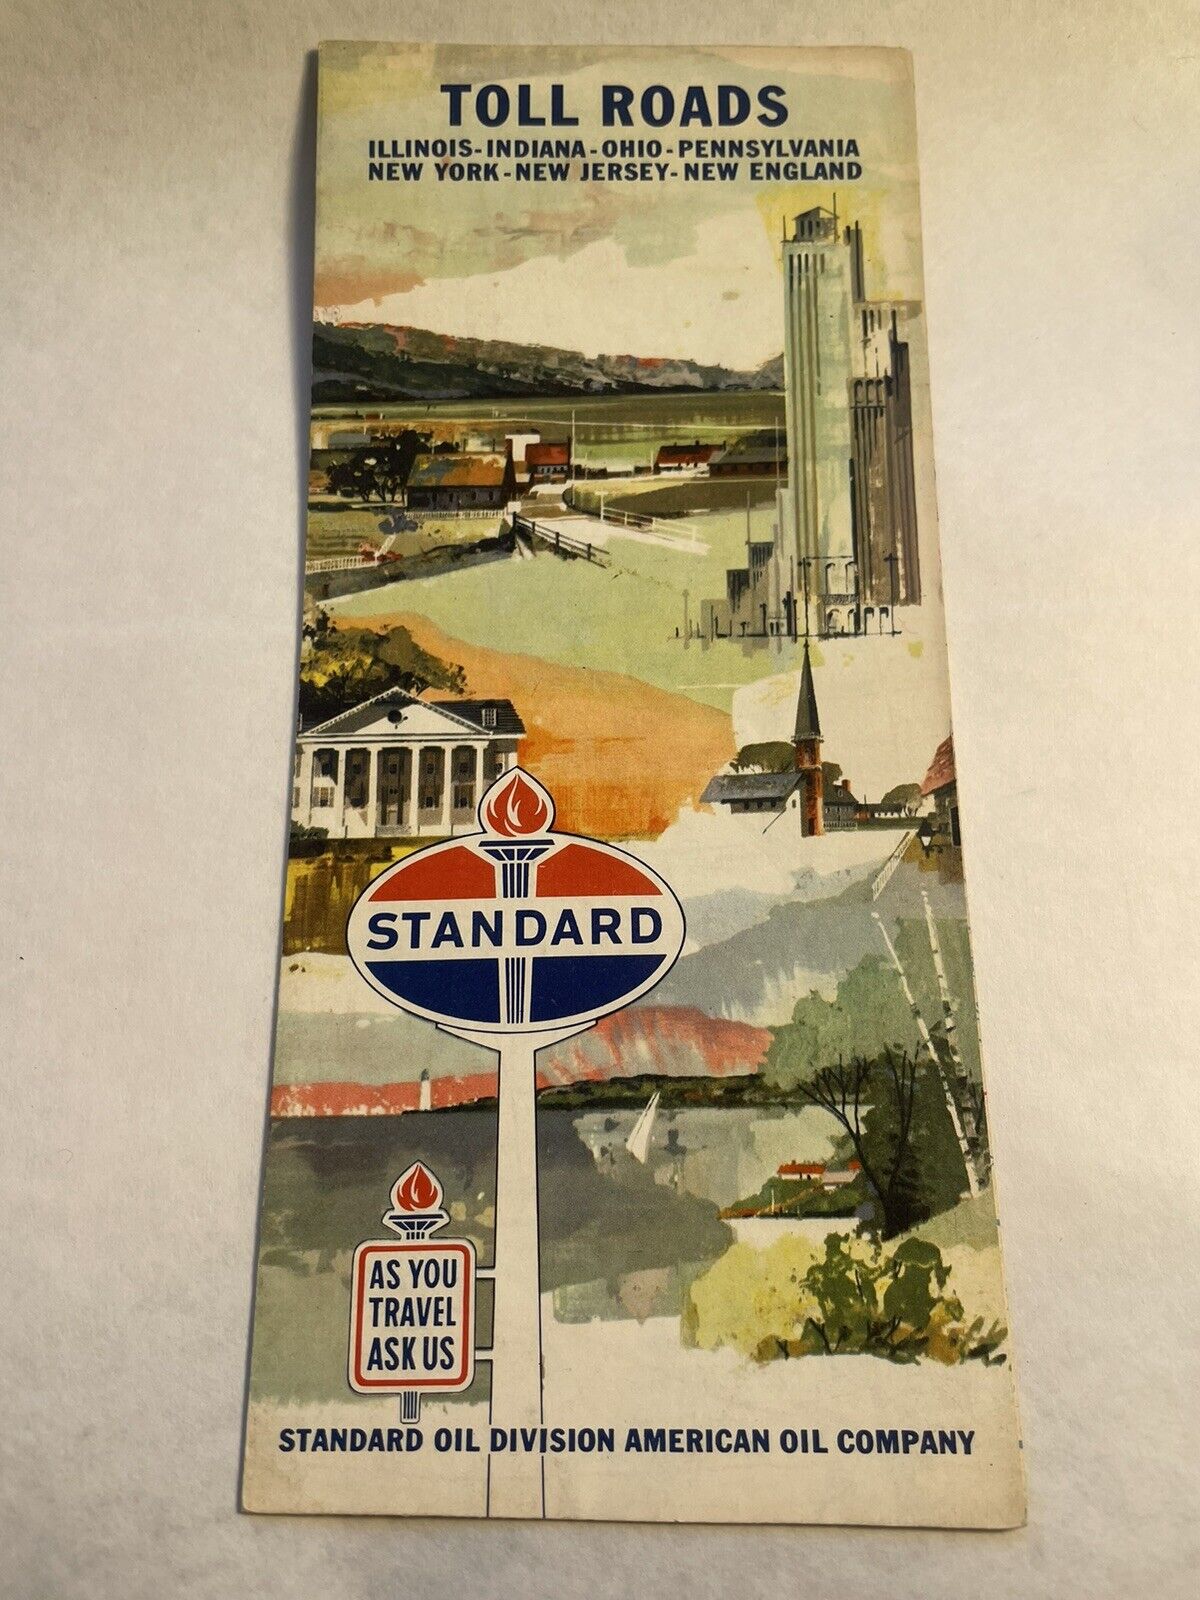 Vintage 1966 Standard Oil Road Map Toll Roads US State Travel Guide Interstate